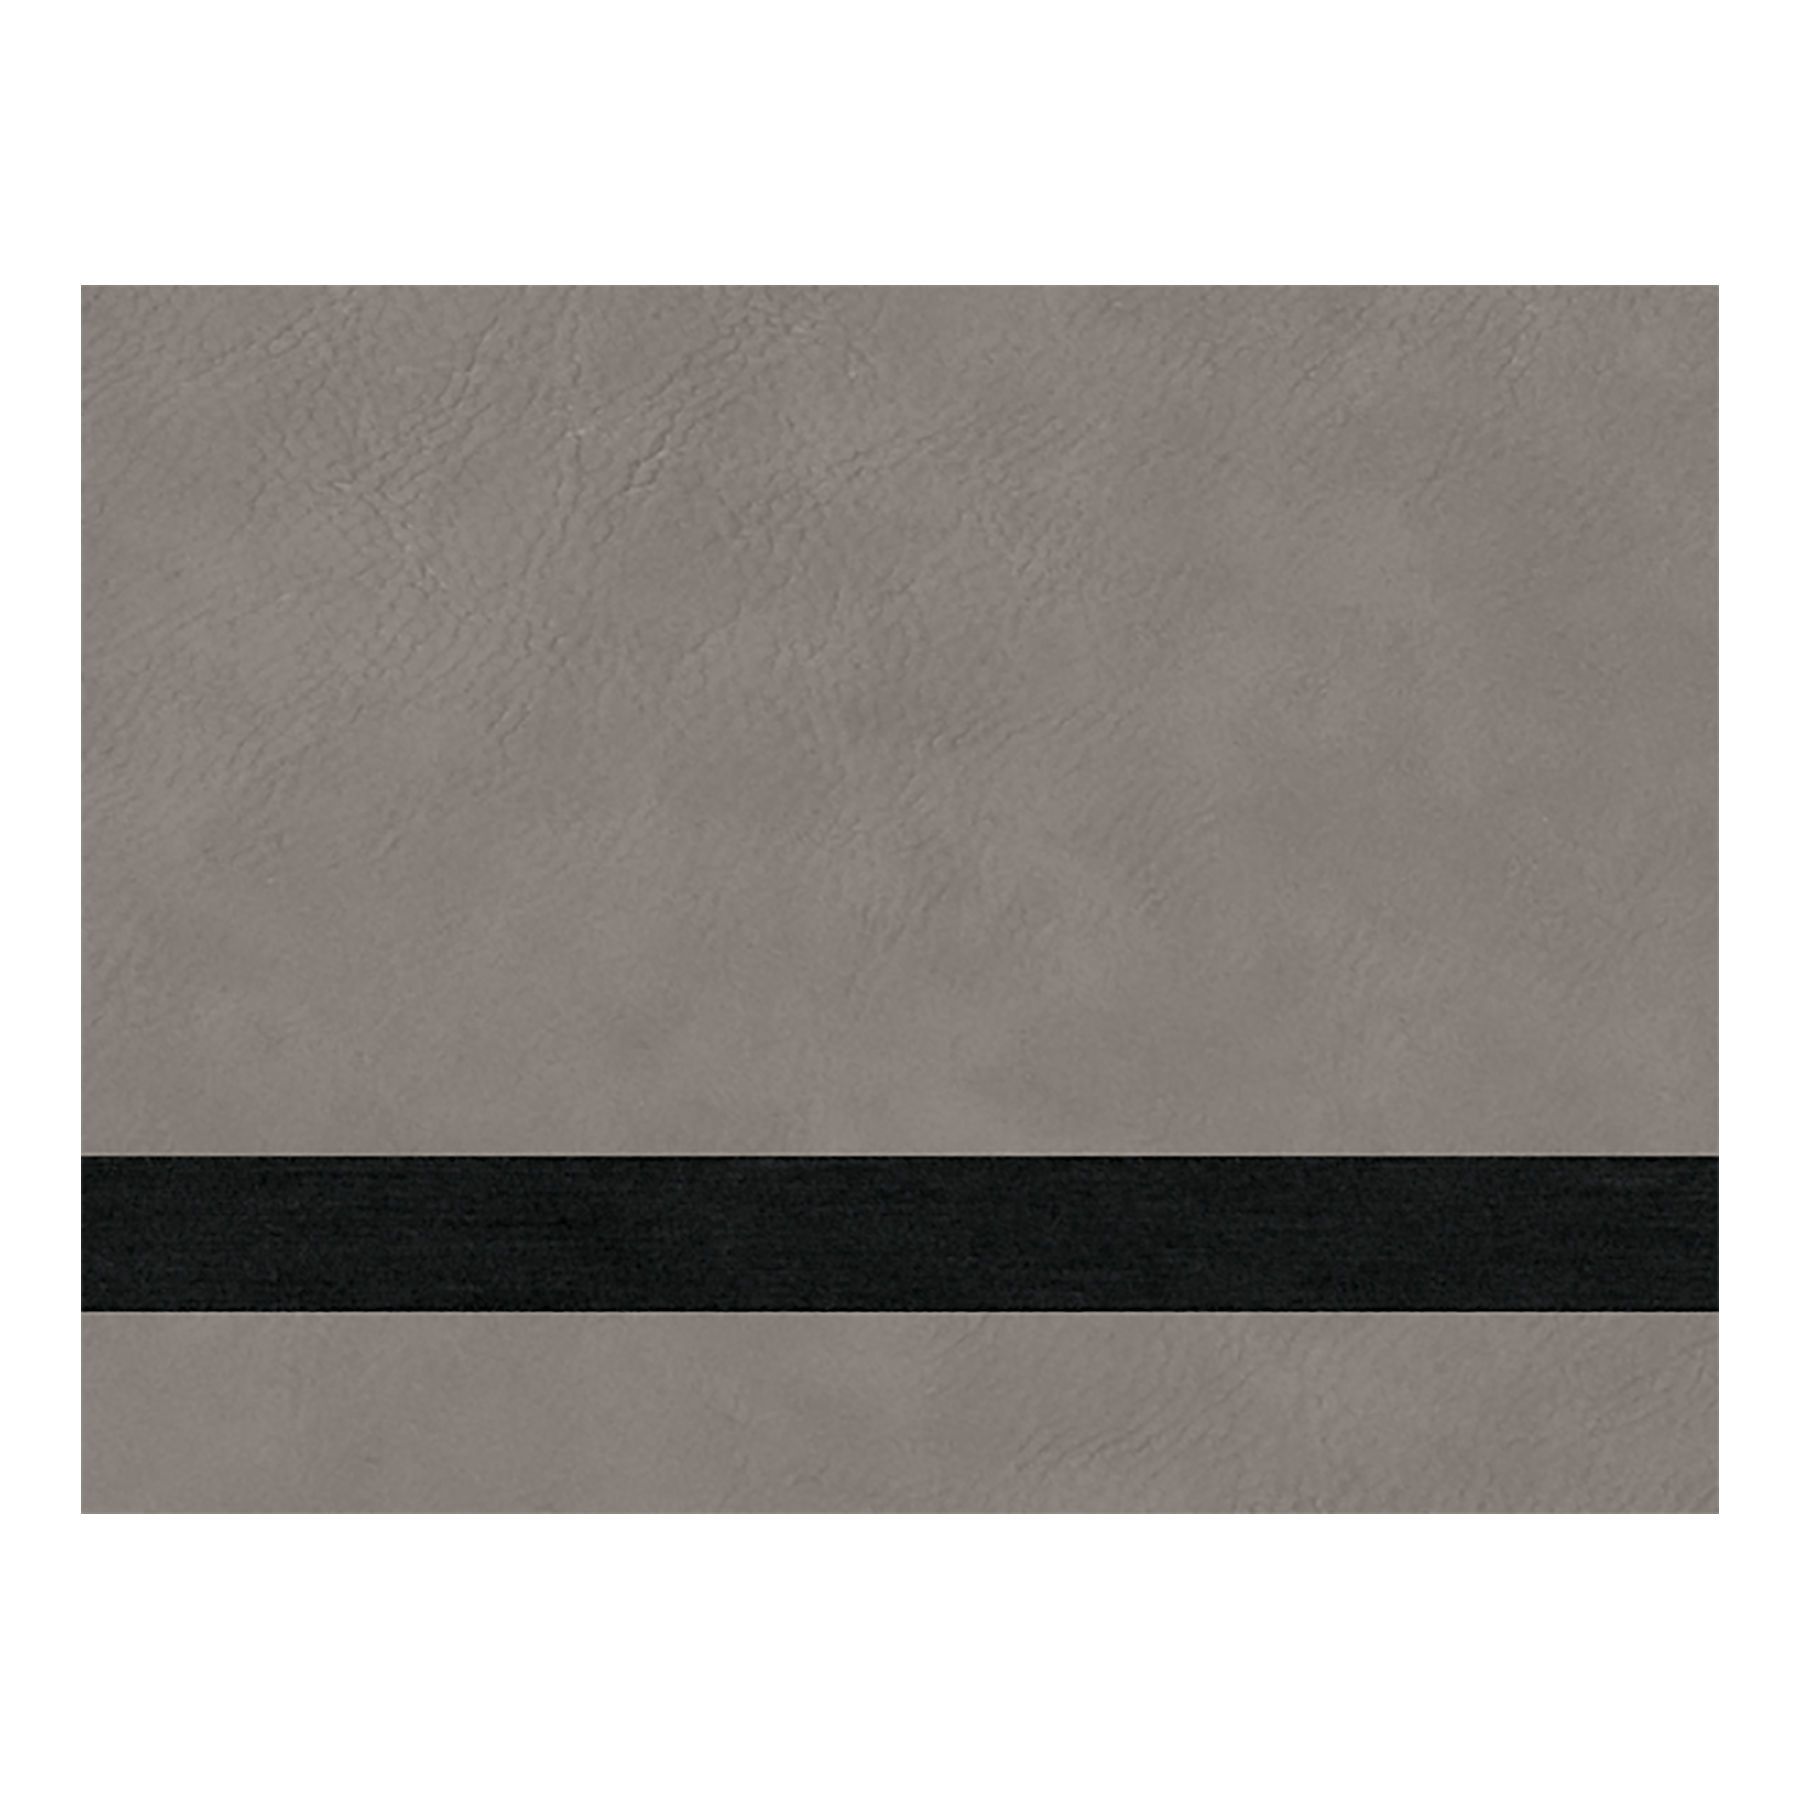 PRE-ORDER! Full Size Laserable Leatherette Sheet Stock, Boss Laser Engravers (Available Jan. 2022) Engraving Supplies Craftworks NW LS-1630 (29" x 15") Gray/Black 